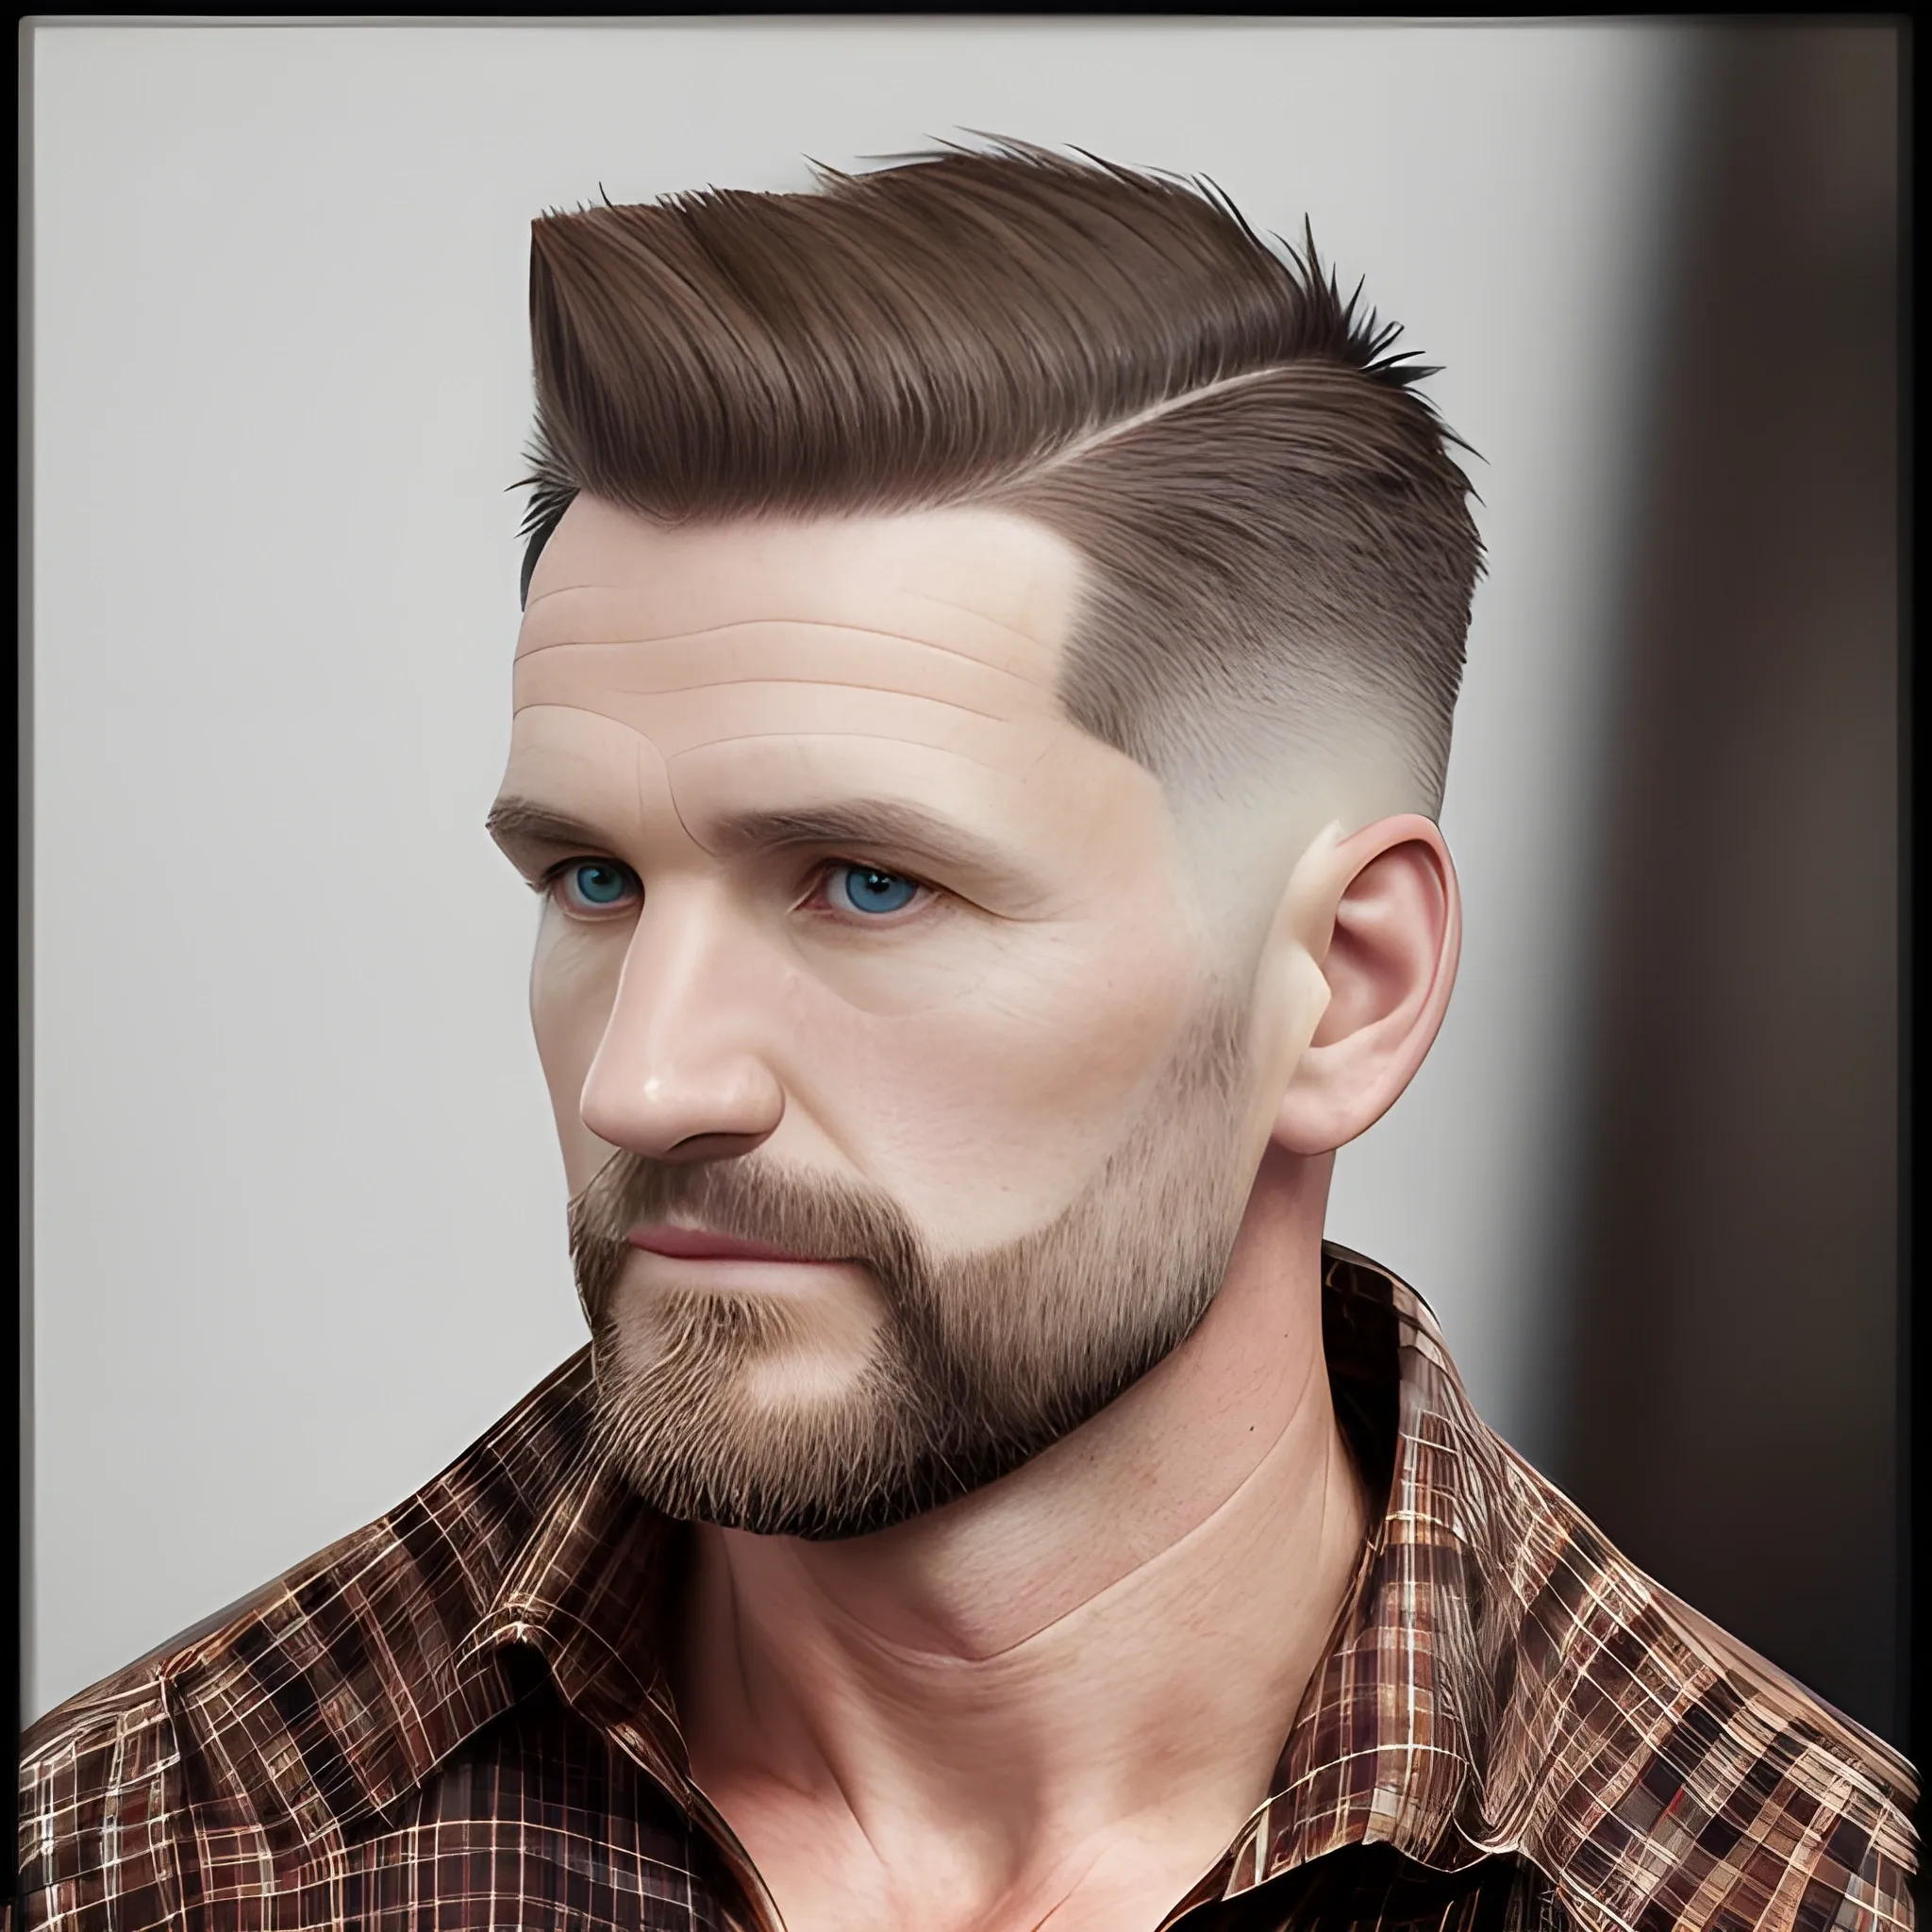 Portrait of 40 year old Caucasian male of German and Scottish ancestry with very short brown hair coming to a peak in front with high fade for haircut with egg shaped head and no facial hair.